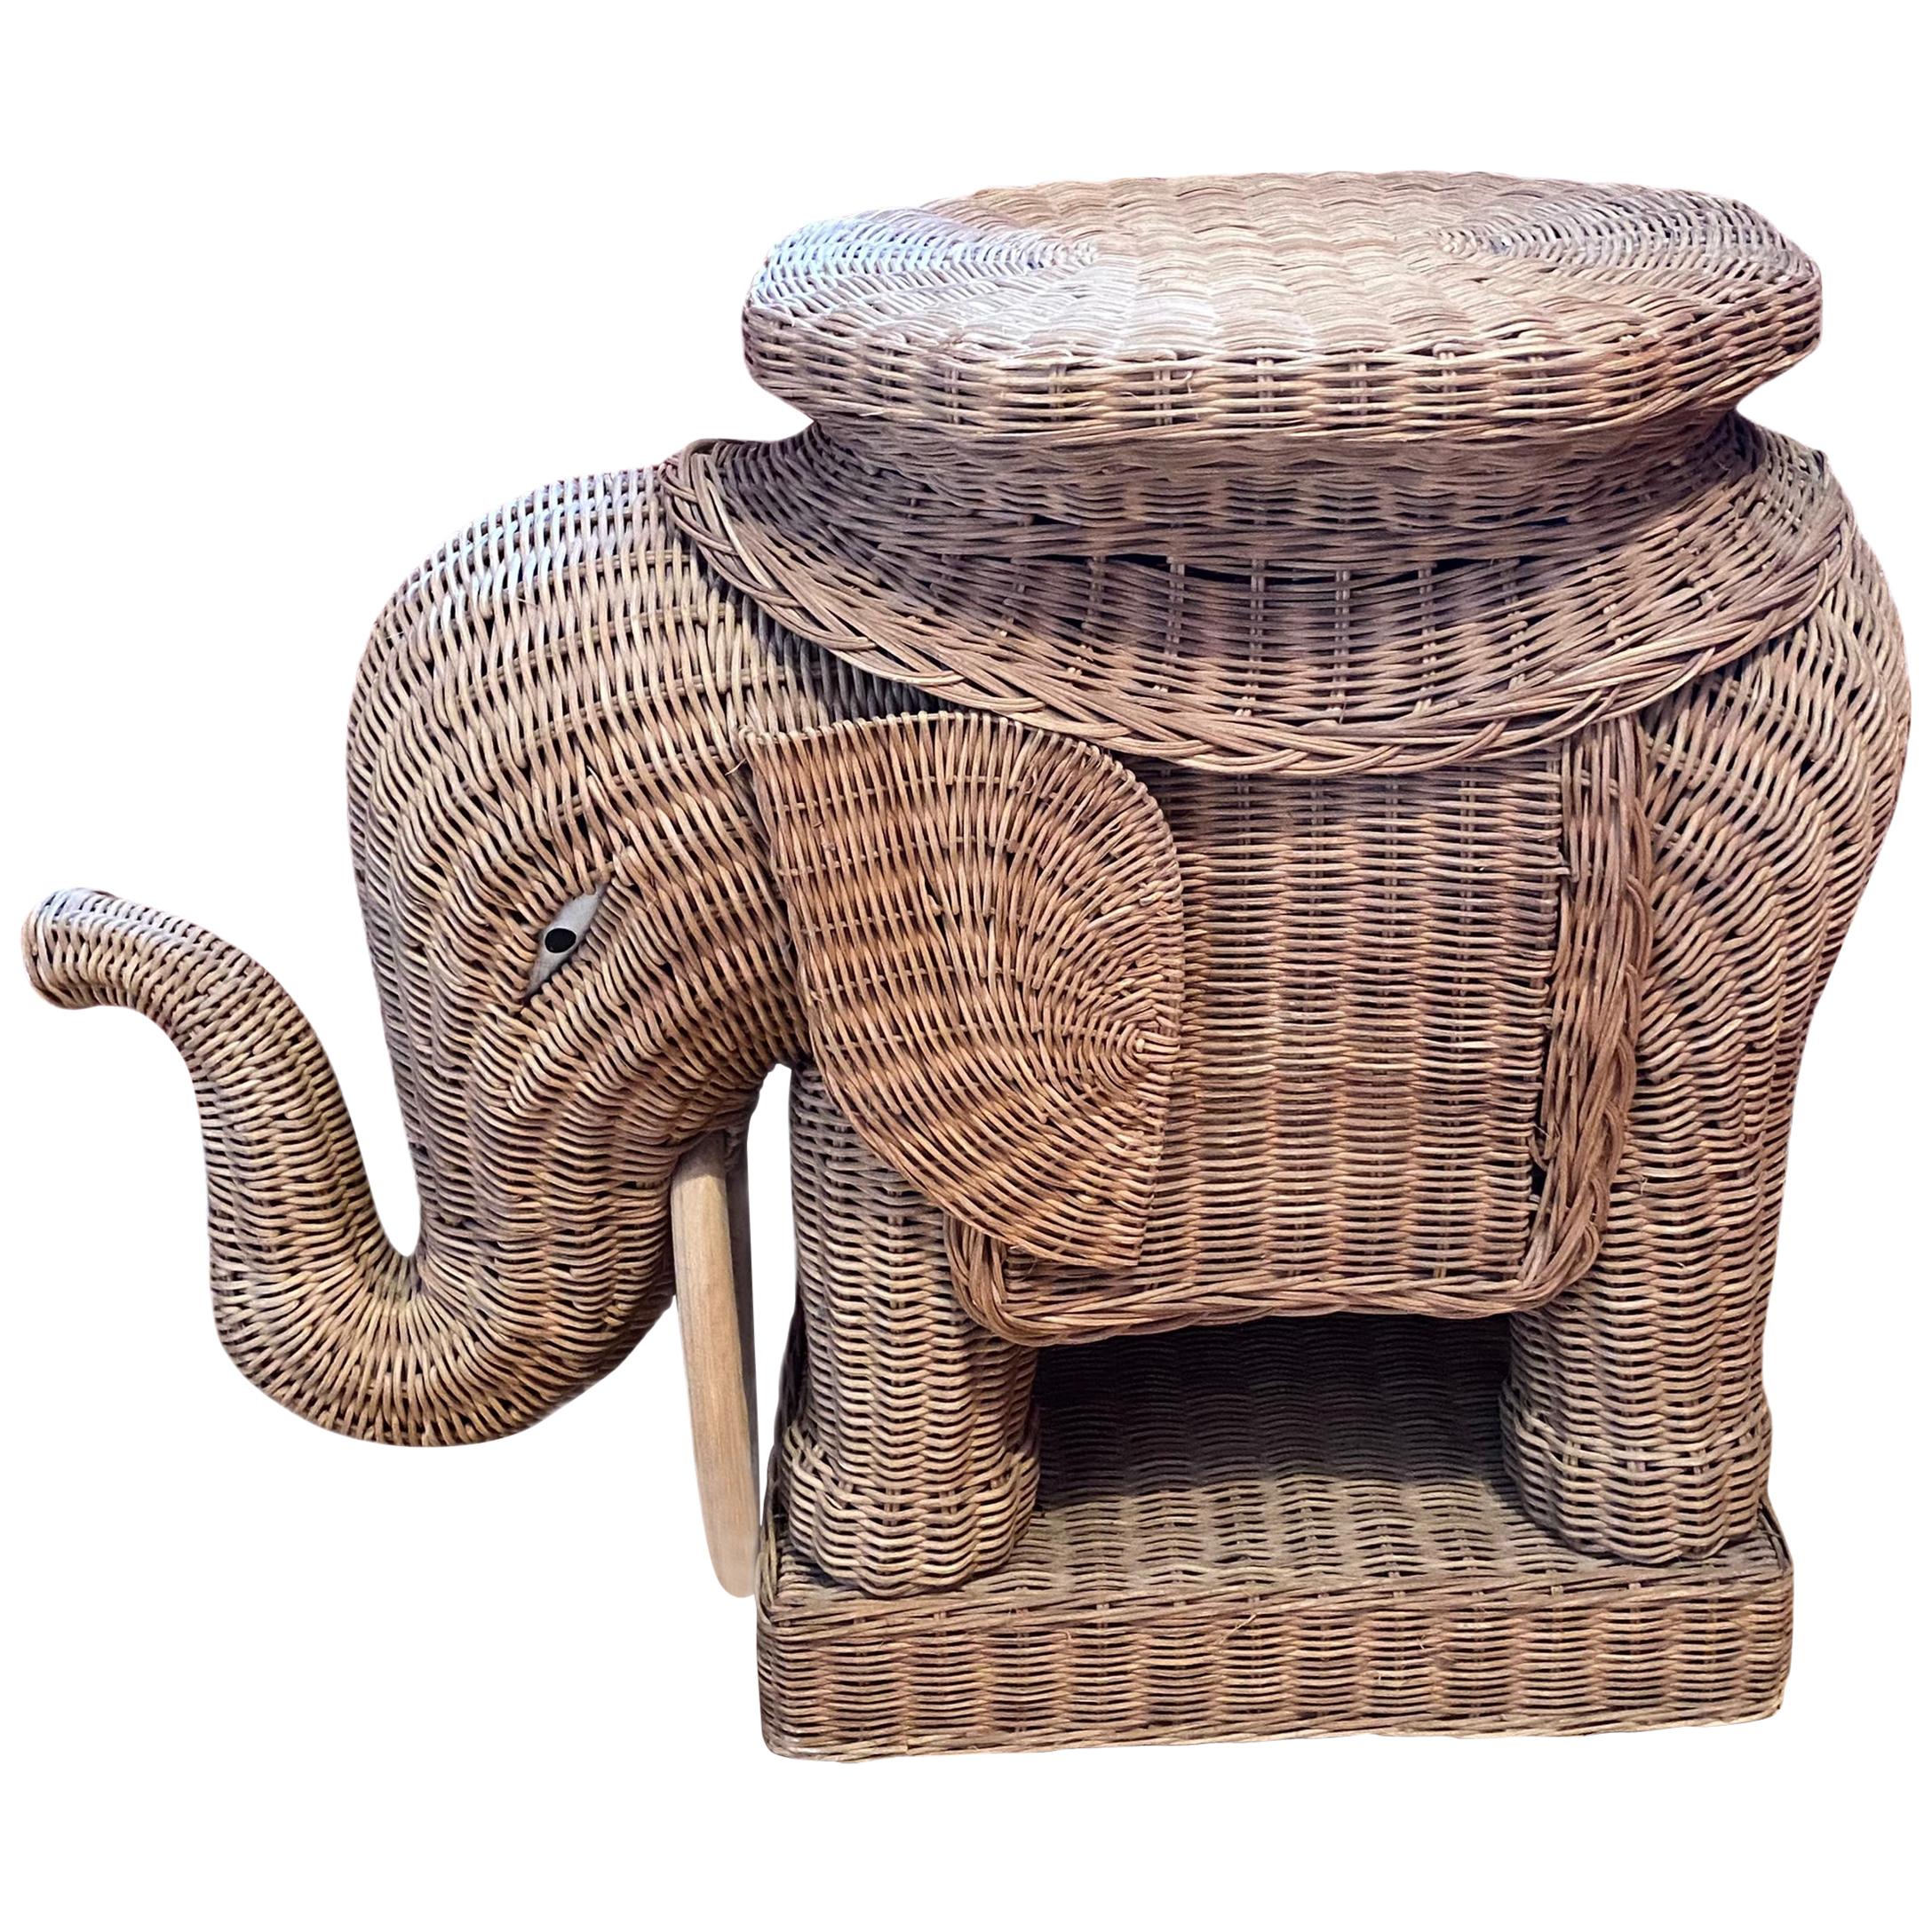 Details about   Sri Lankan Wicker Elephant Statue Rattan Natural Handmade Home Décor Gift 9.7" 